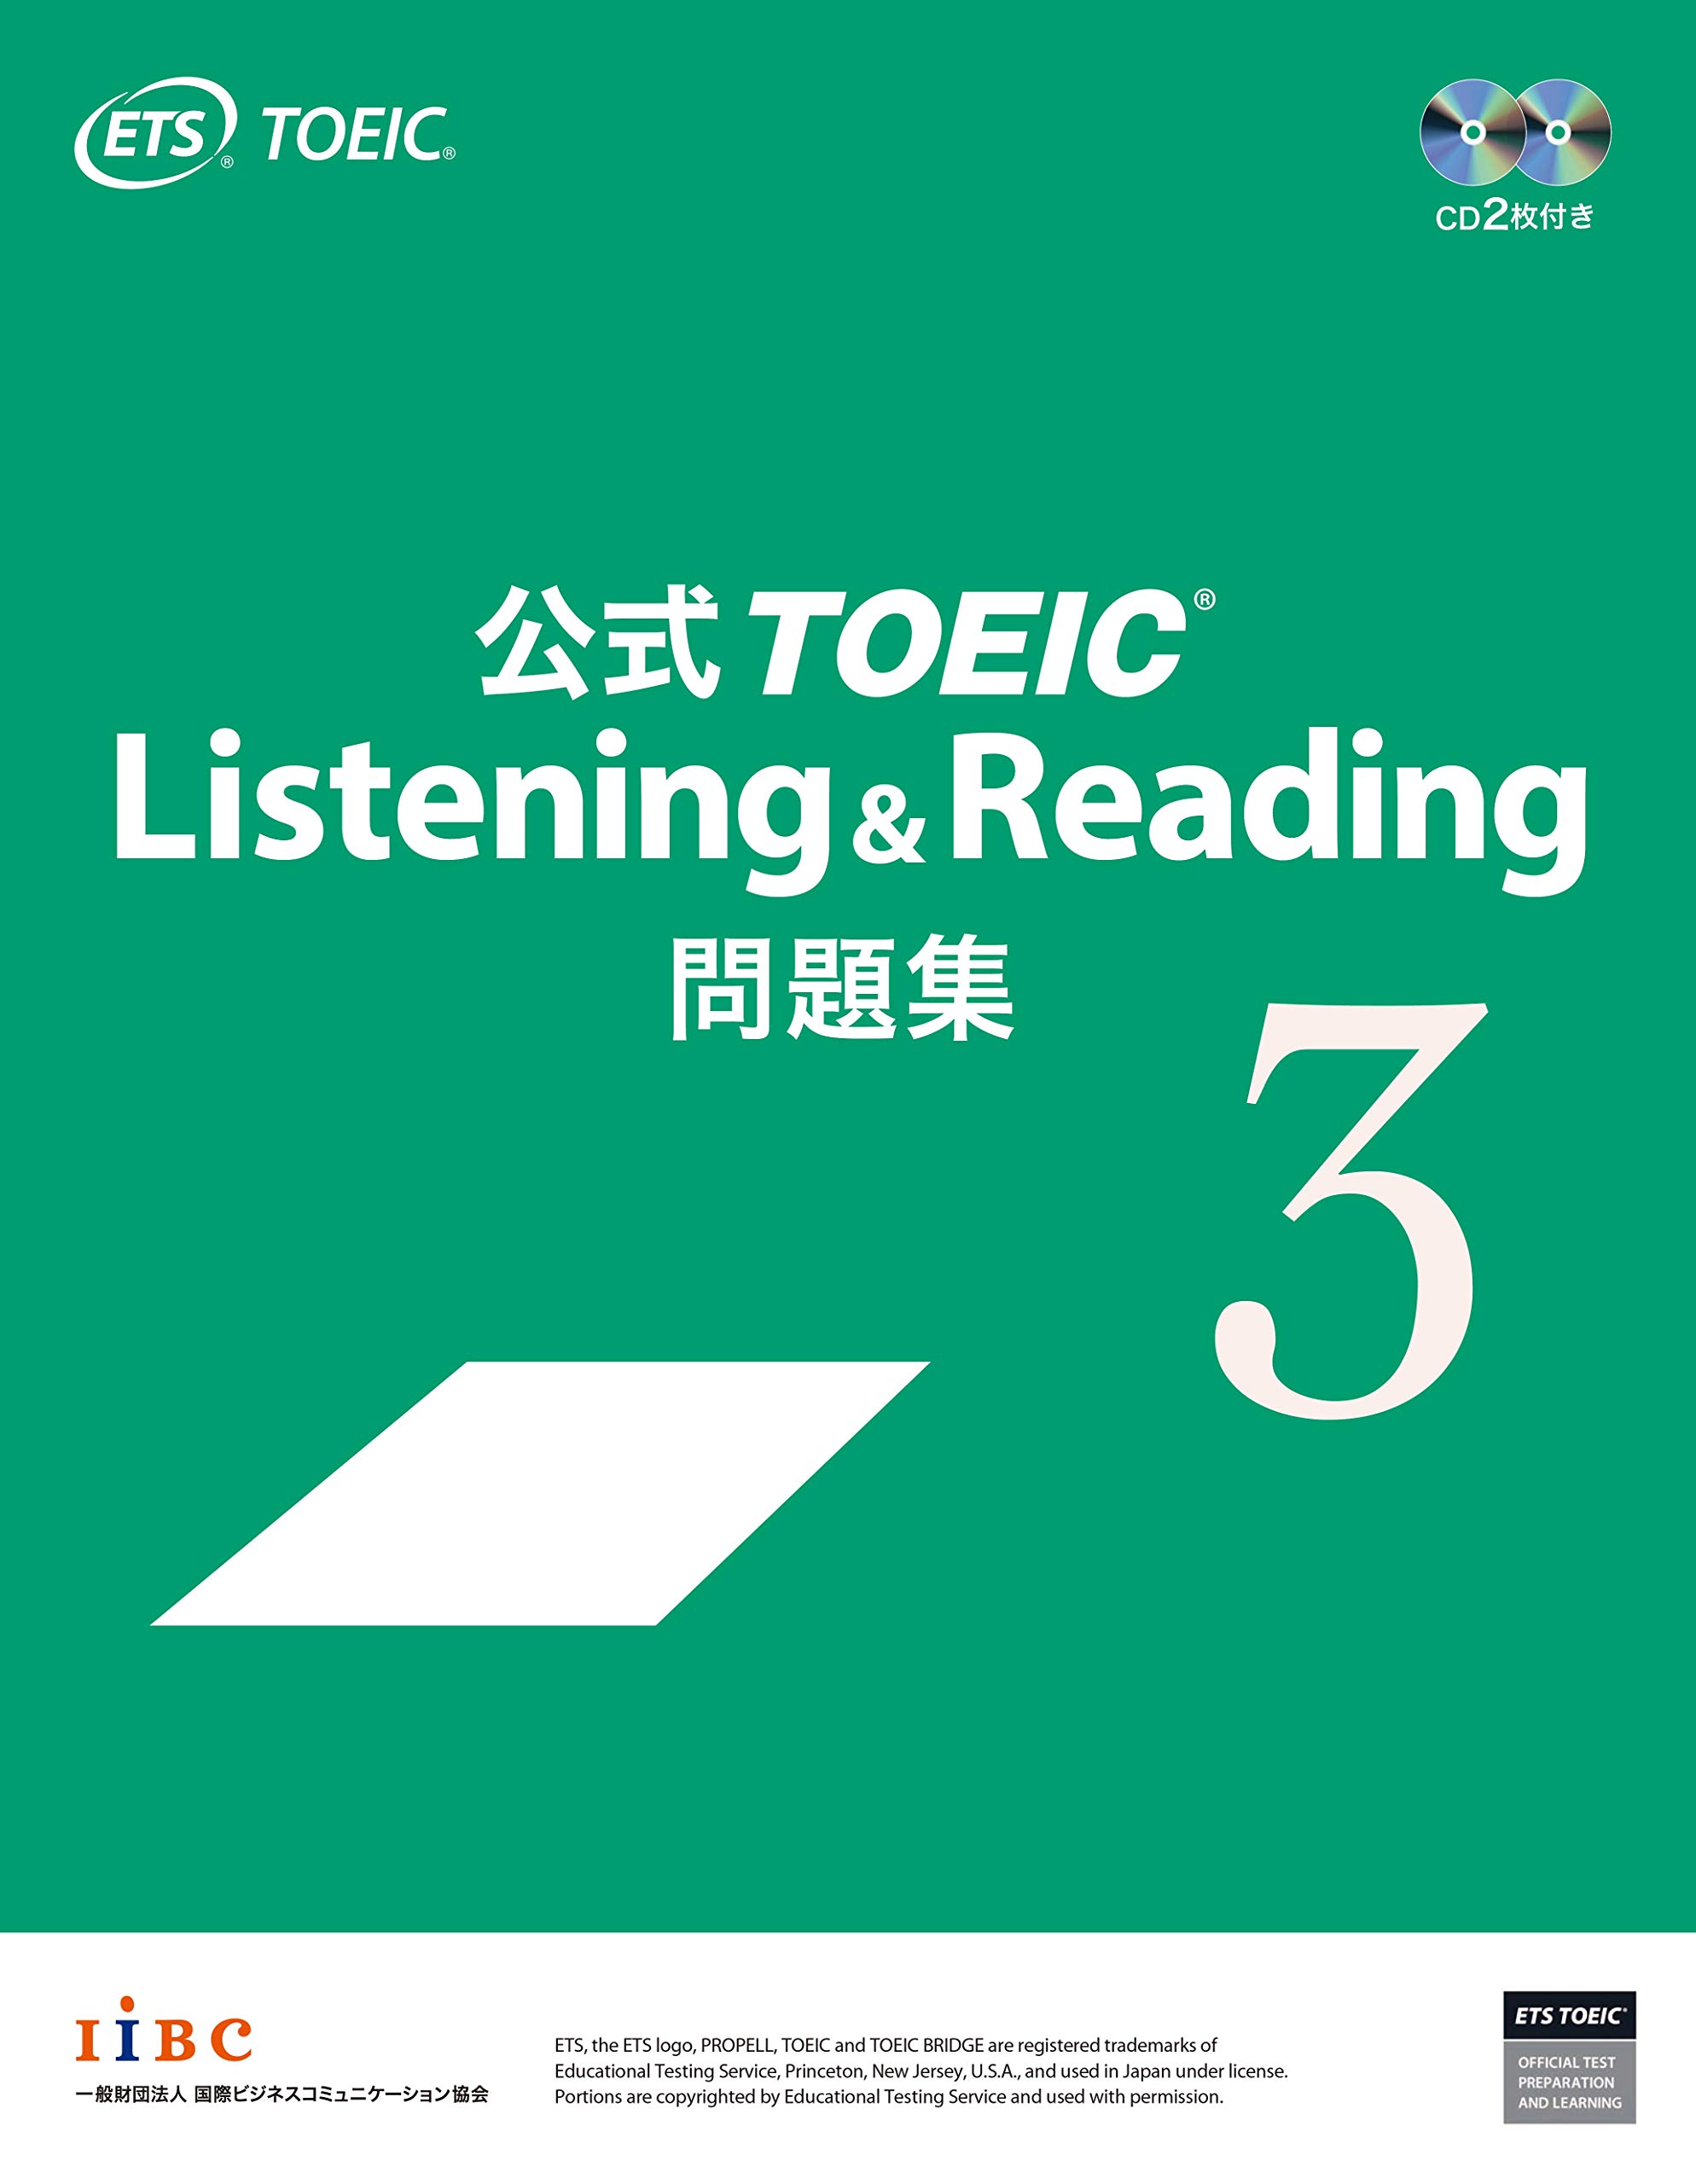 TOEIC 参考書 まとめ売り - 語学・辞書・学習参考書